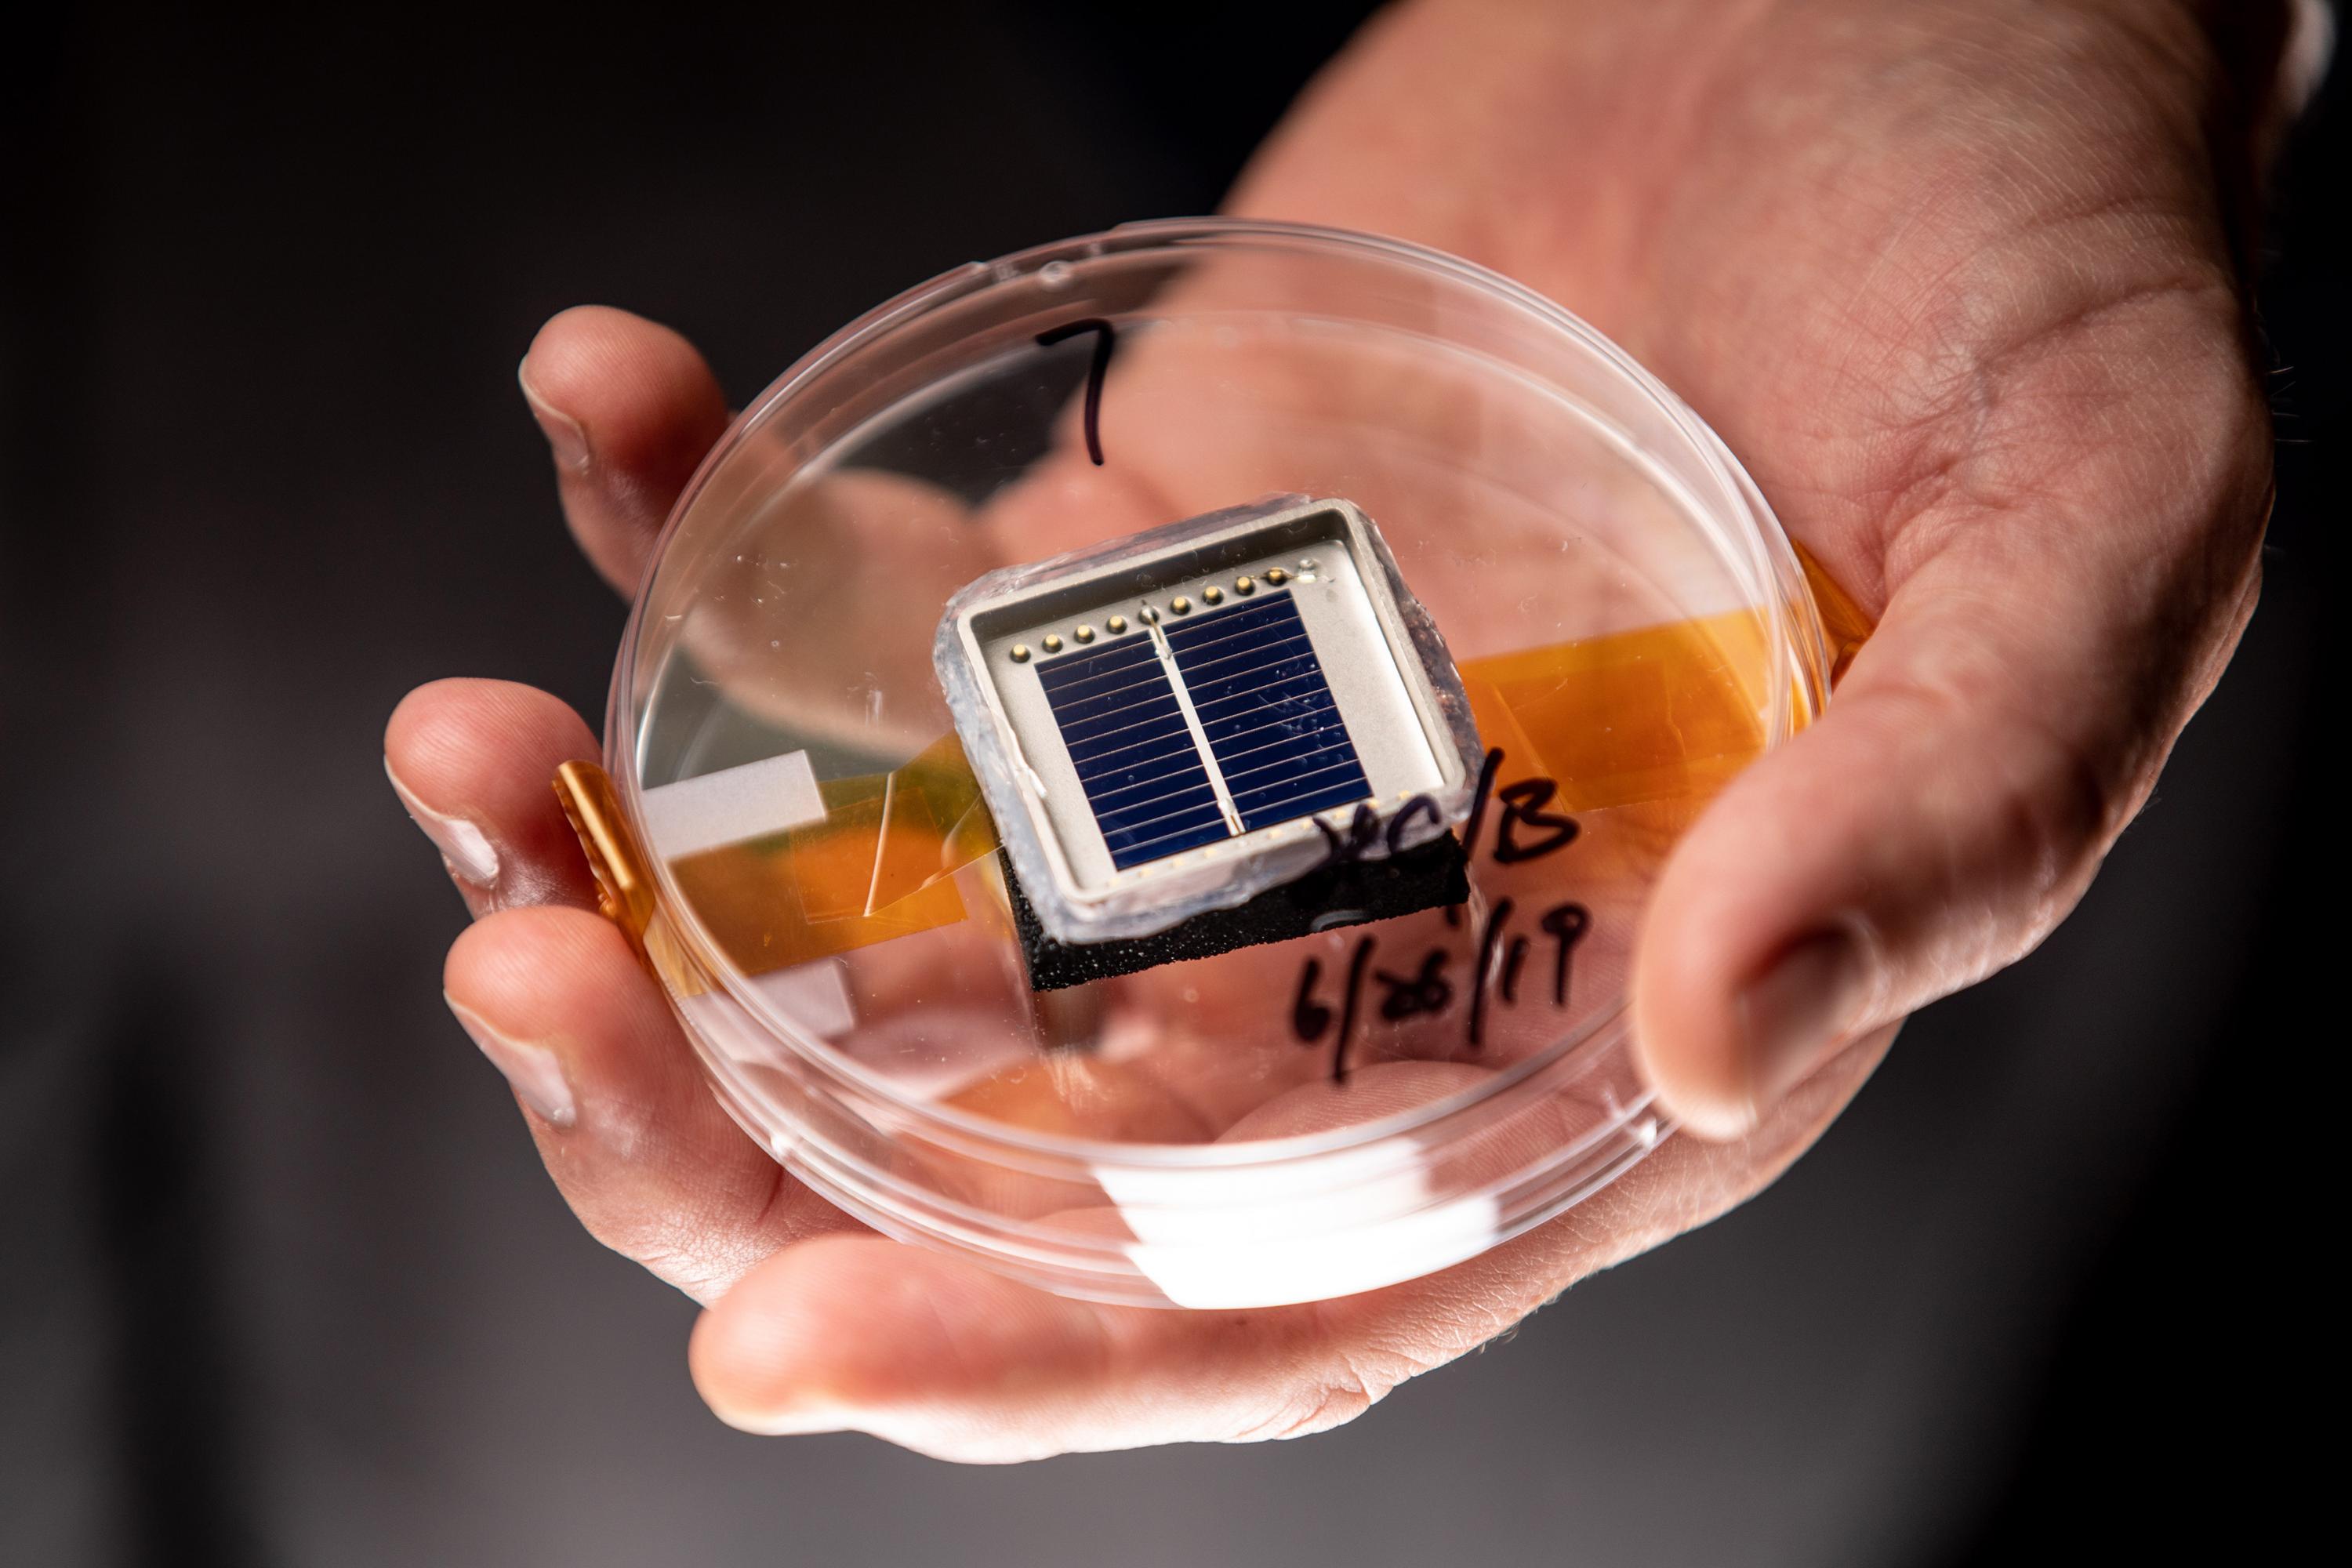 A silicon solar cell fabricated in the University Center of Excellence in Photovoltaic Research and Education. (Photo: Branden Camp, Georgia Tech)